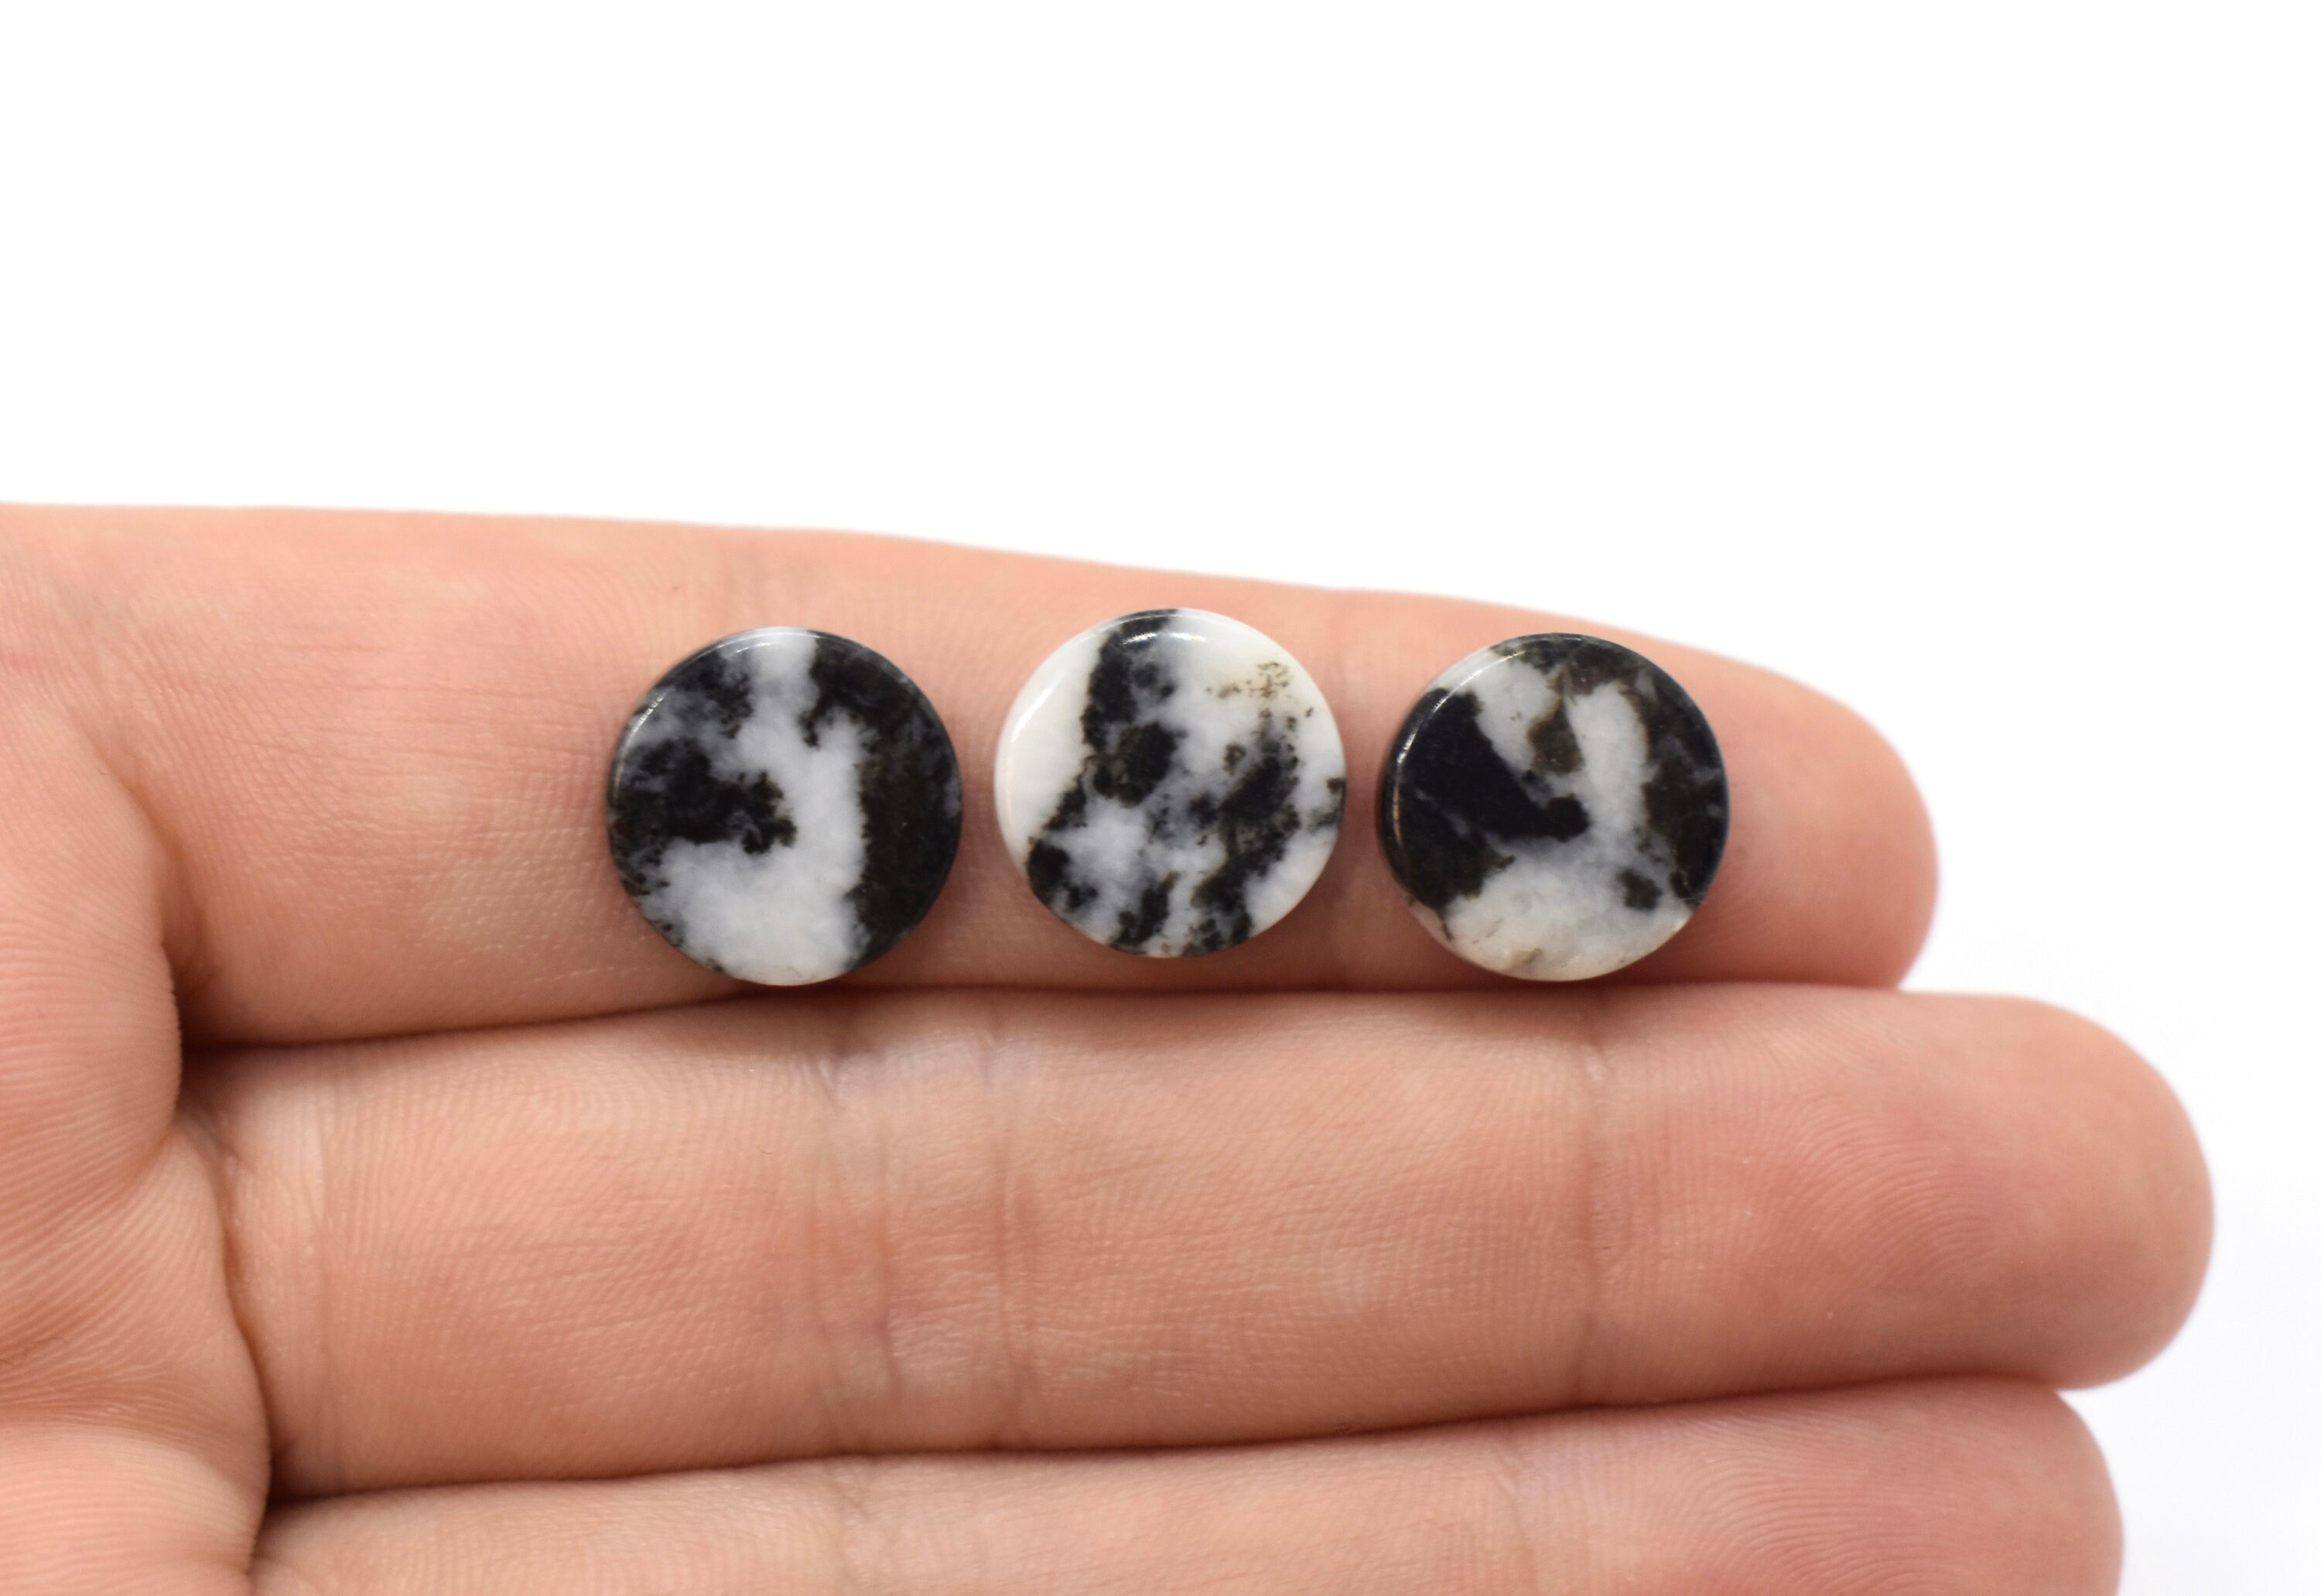 Black and White African Zebra Jasper Gemstone Beads. Full 15 Strands  Available in 2 Shapes: 14mm Coin and 14mm Square. Black & White Stone. -   Finland